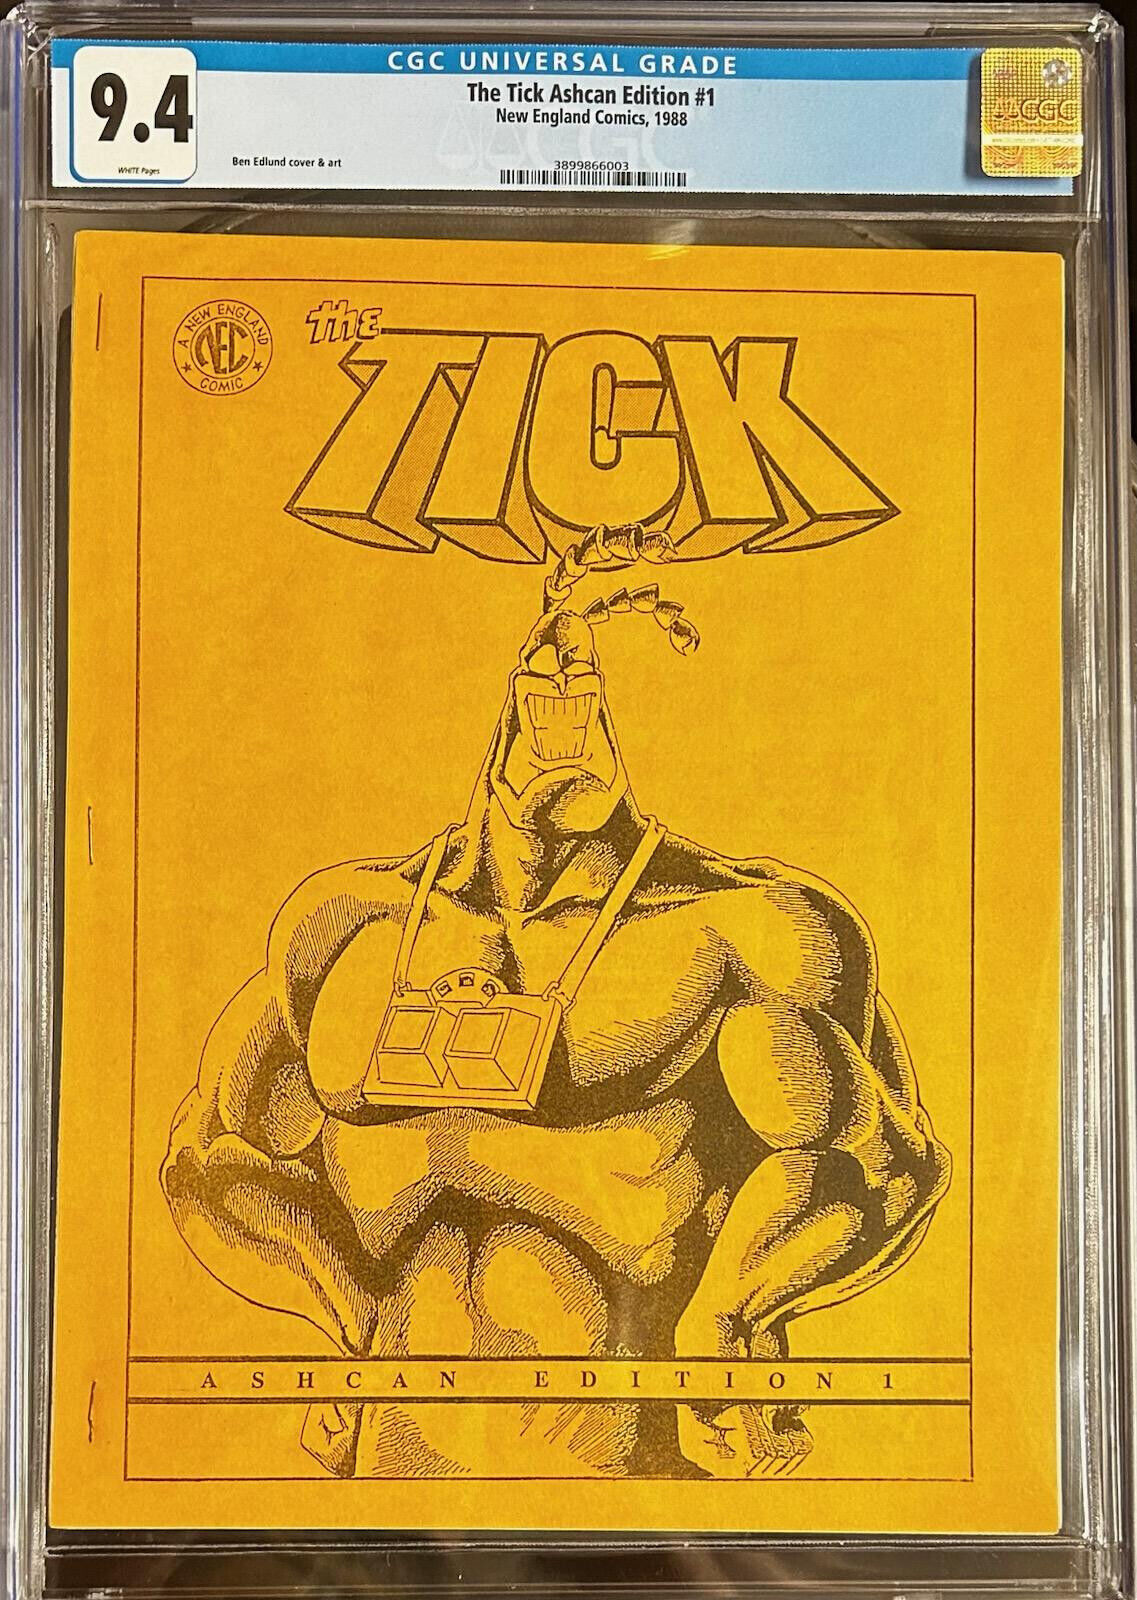 The Tick Ashcan Edition #1 NEC 1988 Gold Cover CGC 9.4 White Pages SUPER RARE